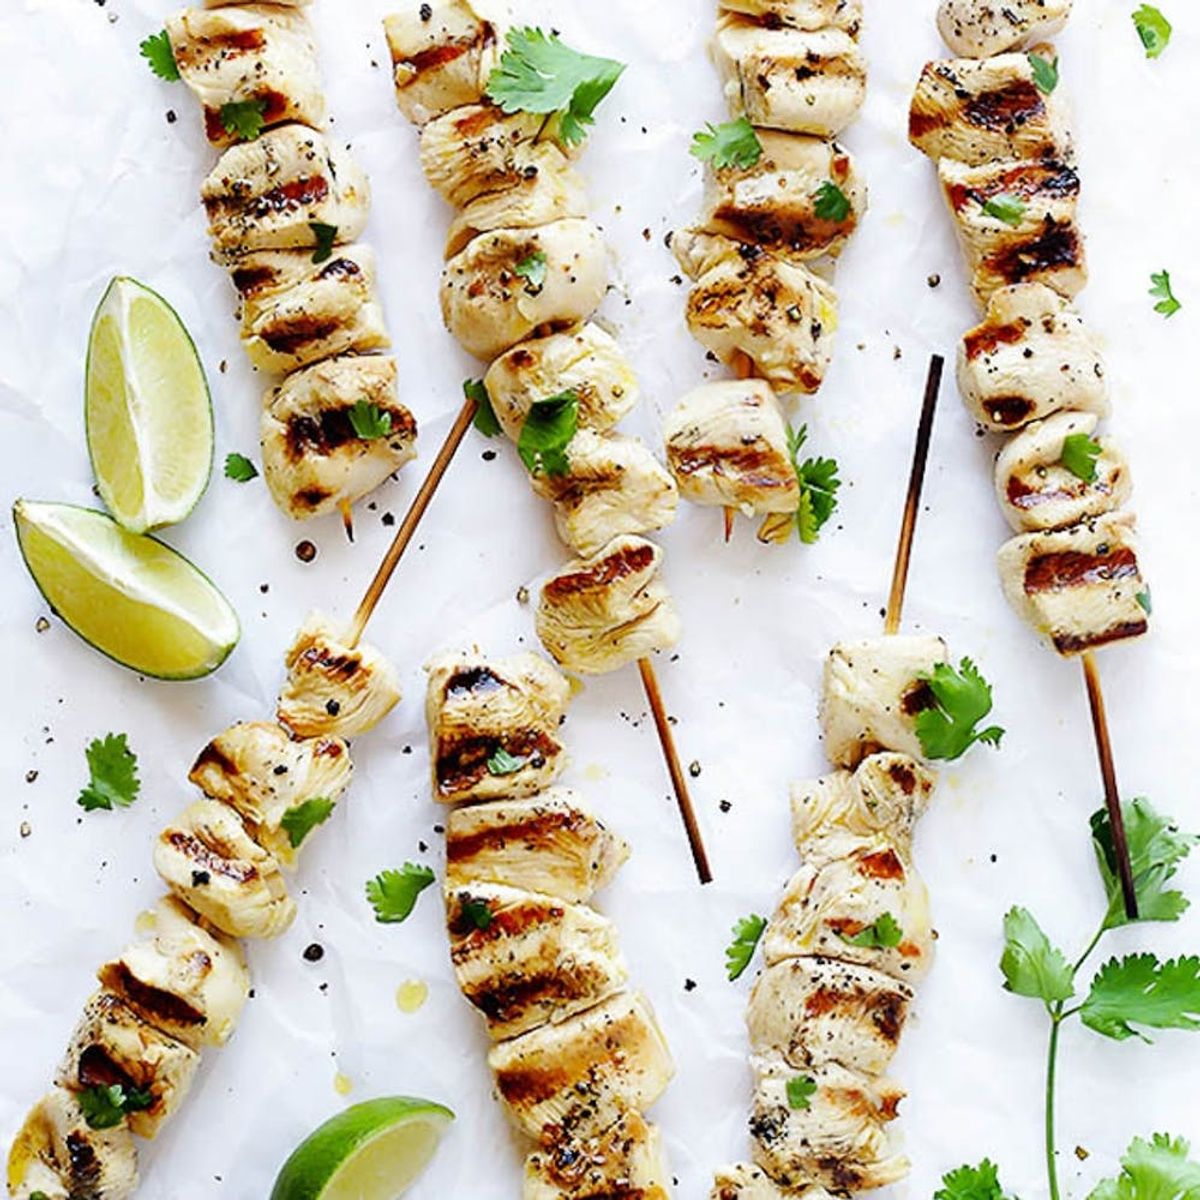 20 Grilled Skewer Recipes to Get You Ready for Barbecue Season